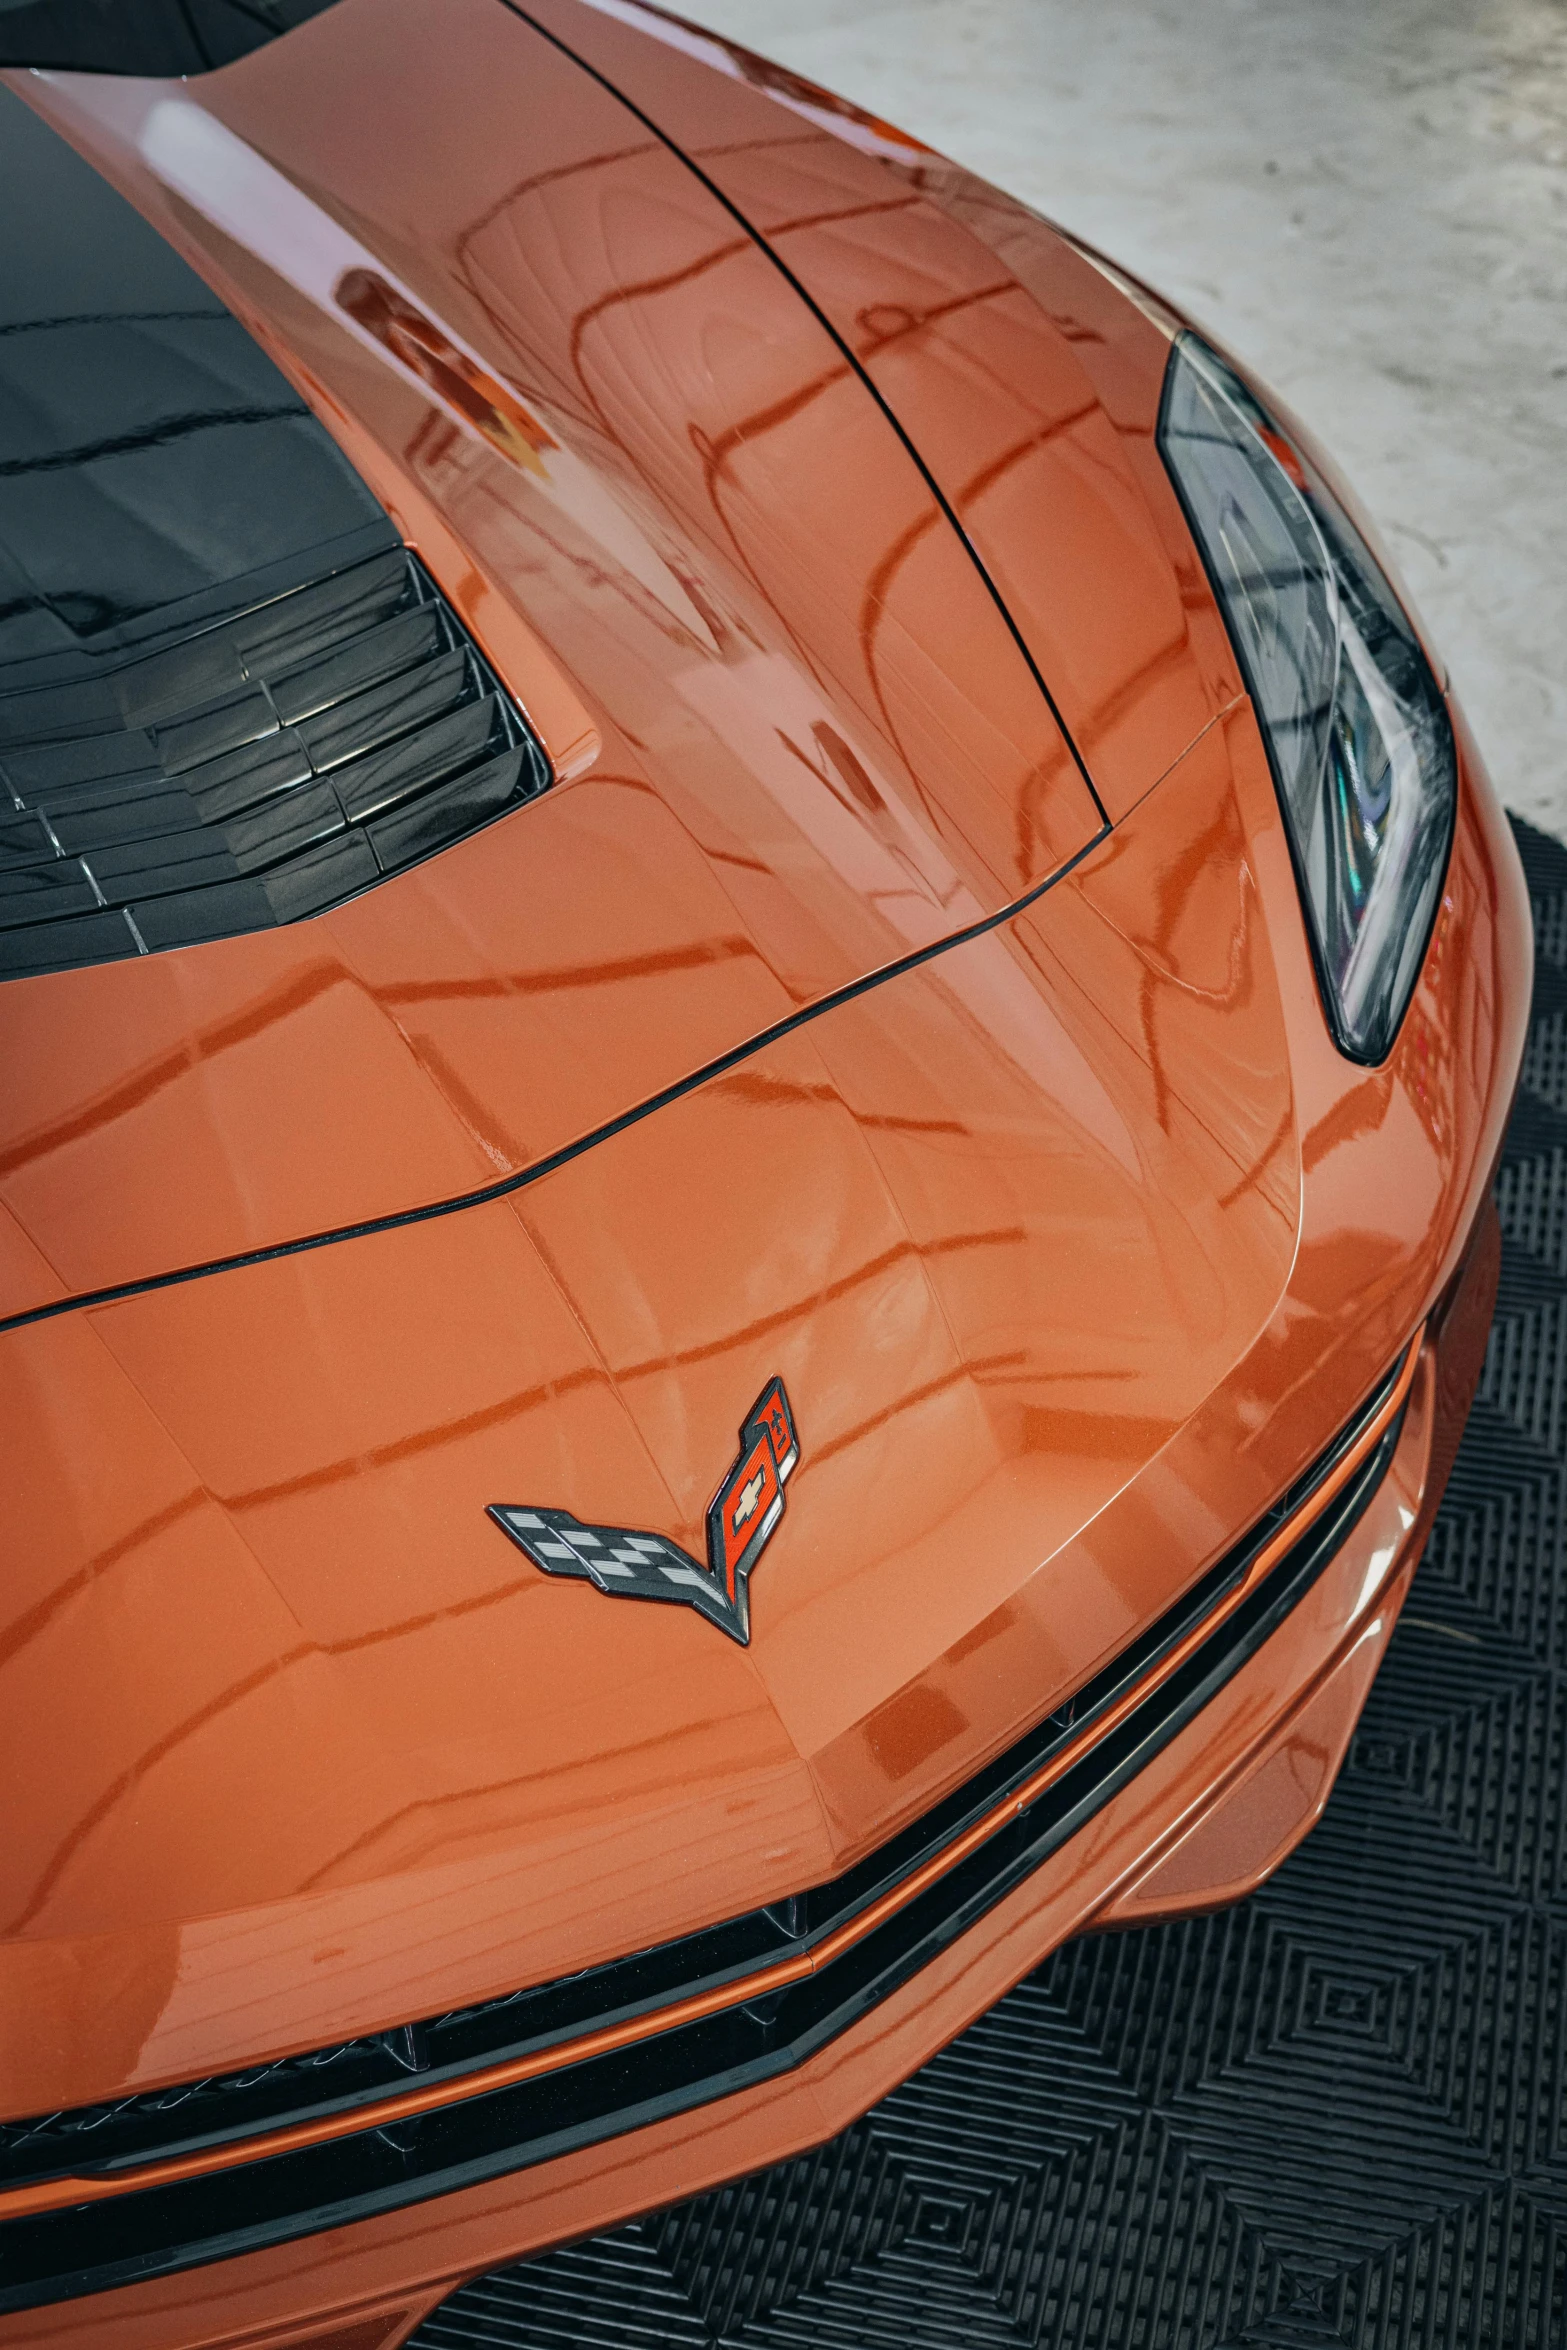 close up of the front fender and badge on a orange corvette